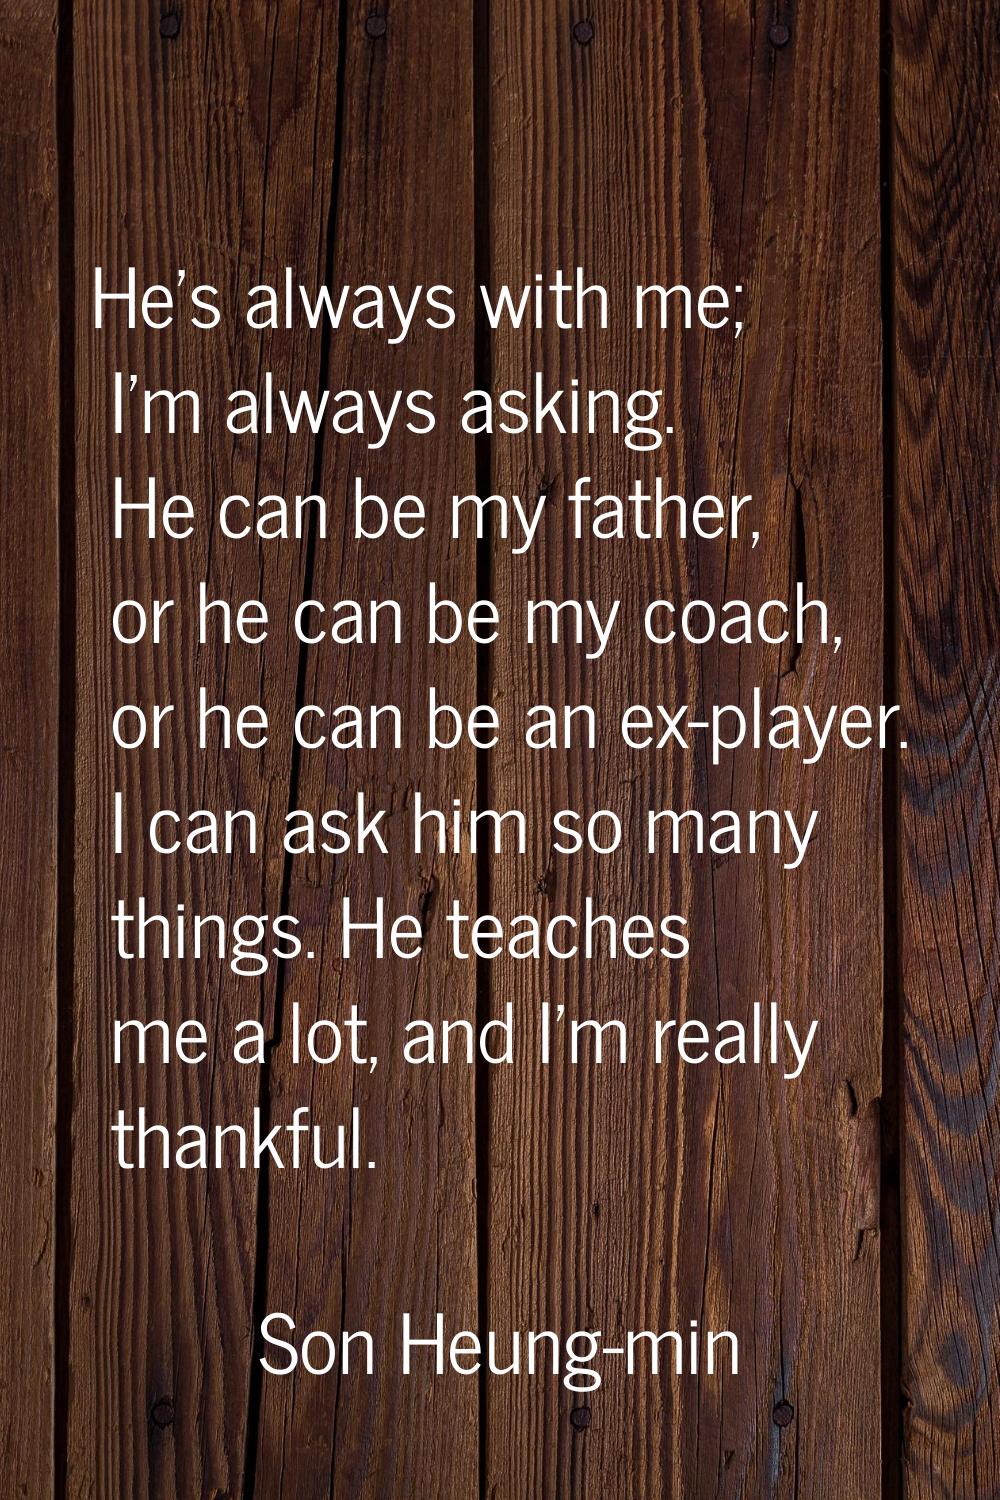 He's always with me; I'm always asking. He can be my father, or he can be my coach, or he can be an